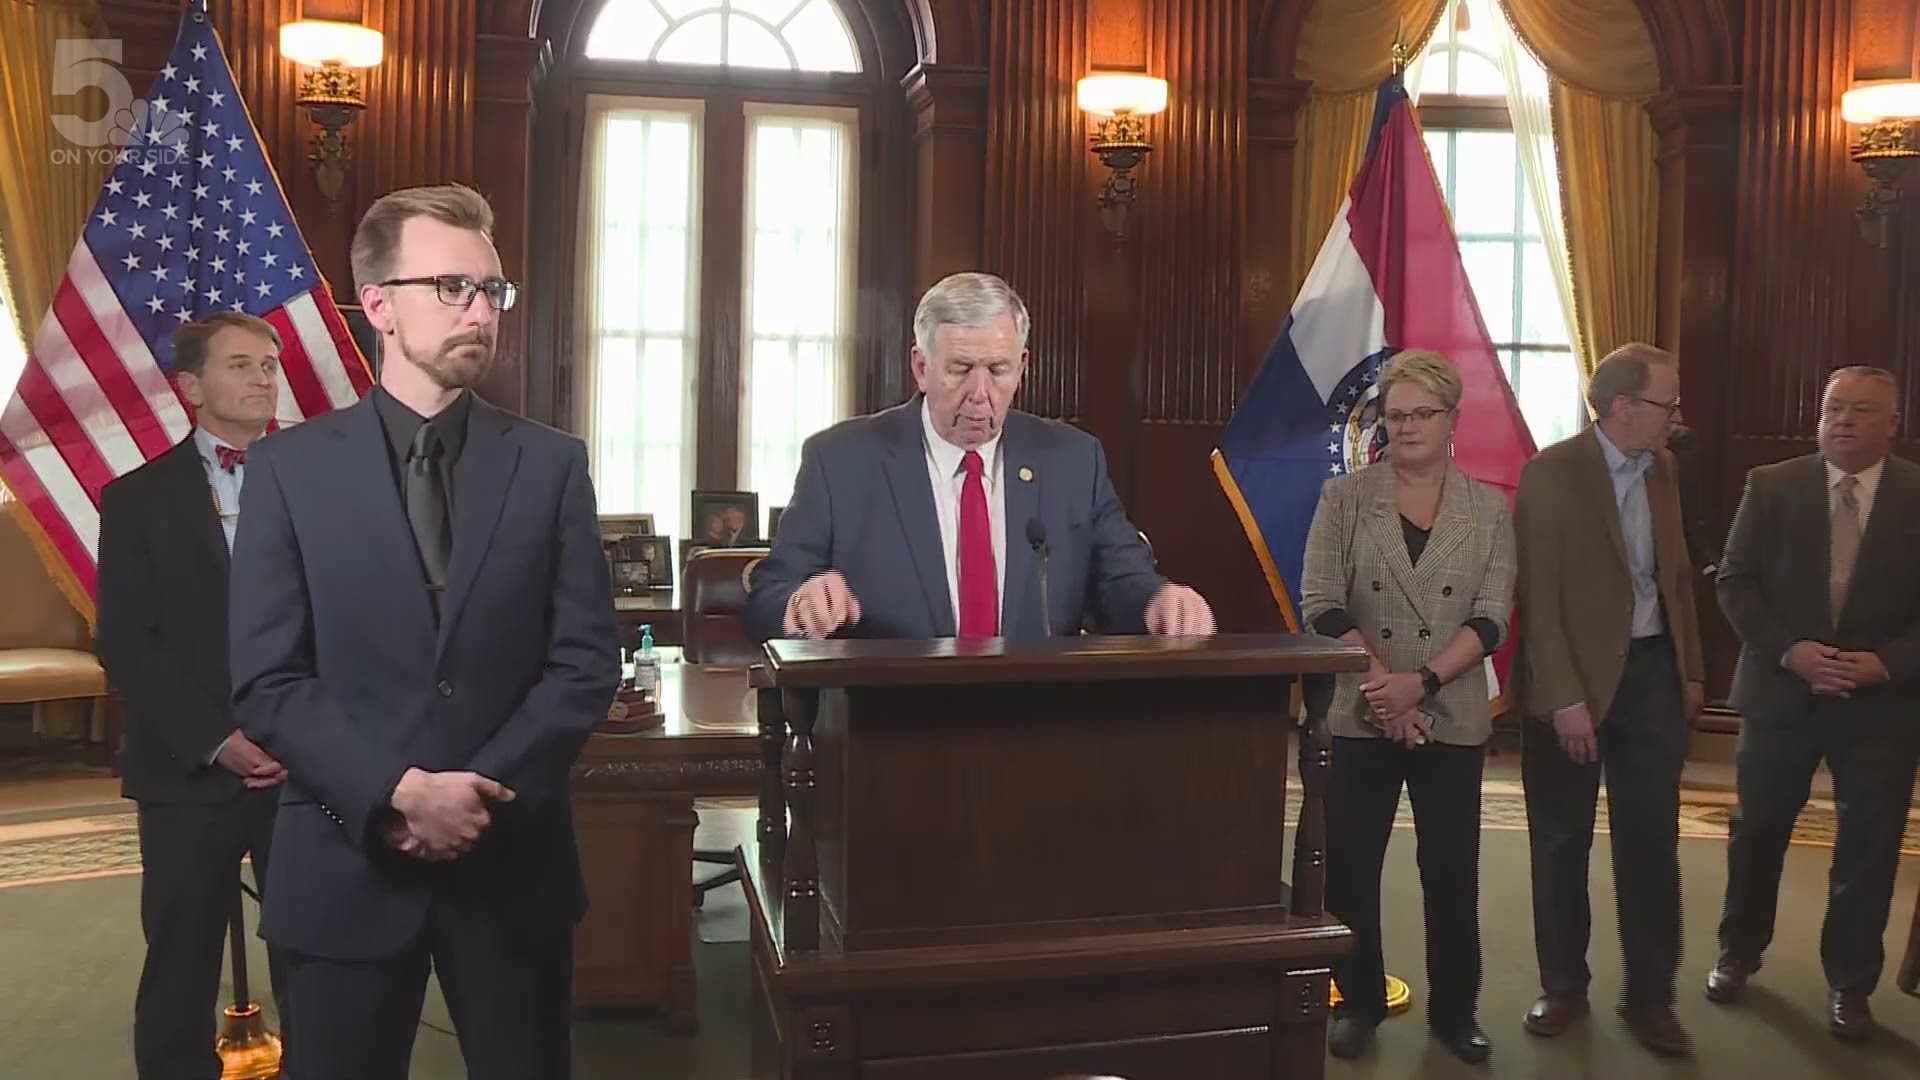 Gov. Parson declared a state of emergency in response to coronavirus in Missouri. He also announced two additional people have tested "presumptive positive."